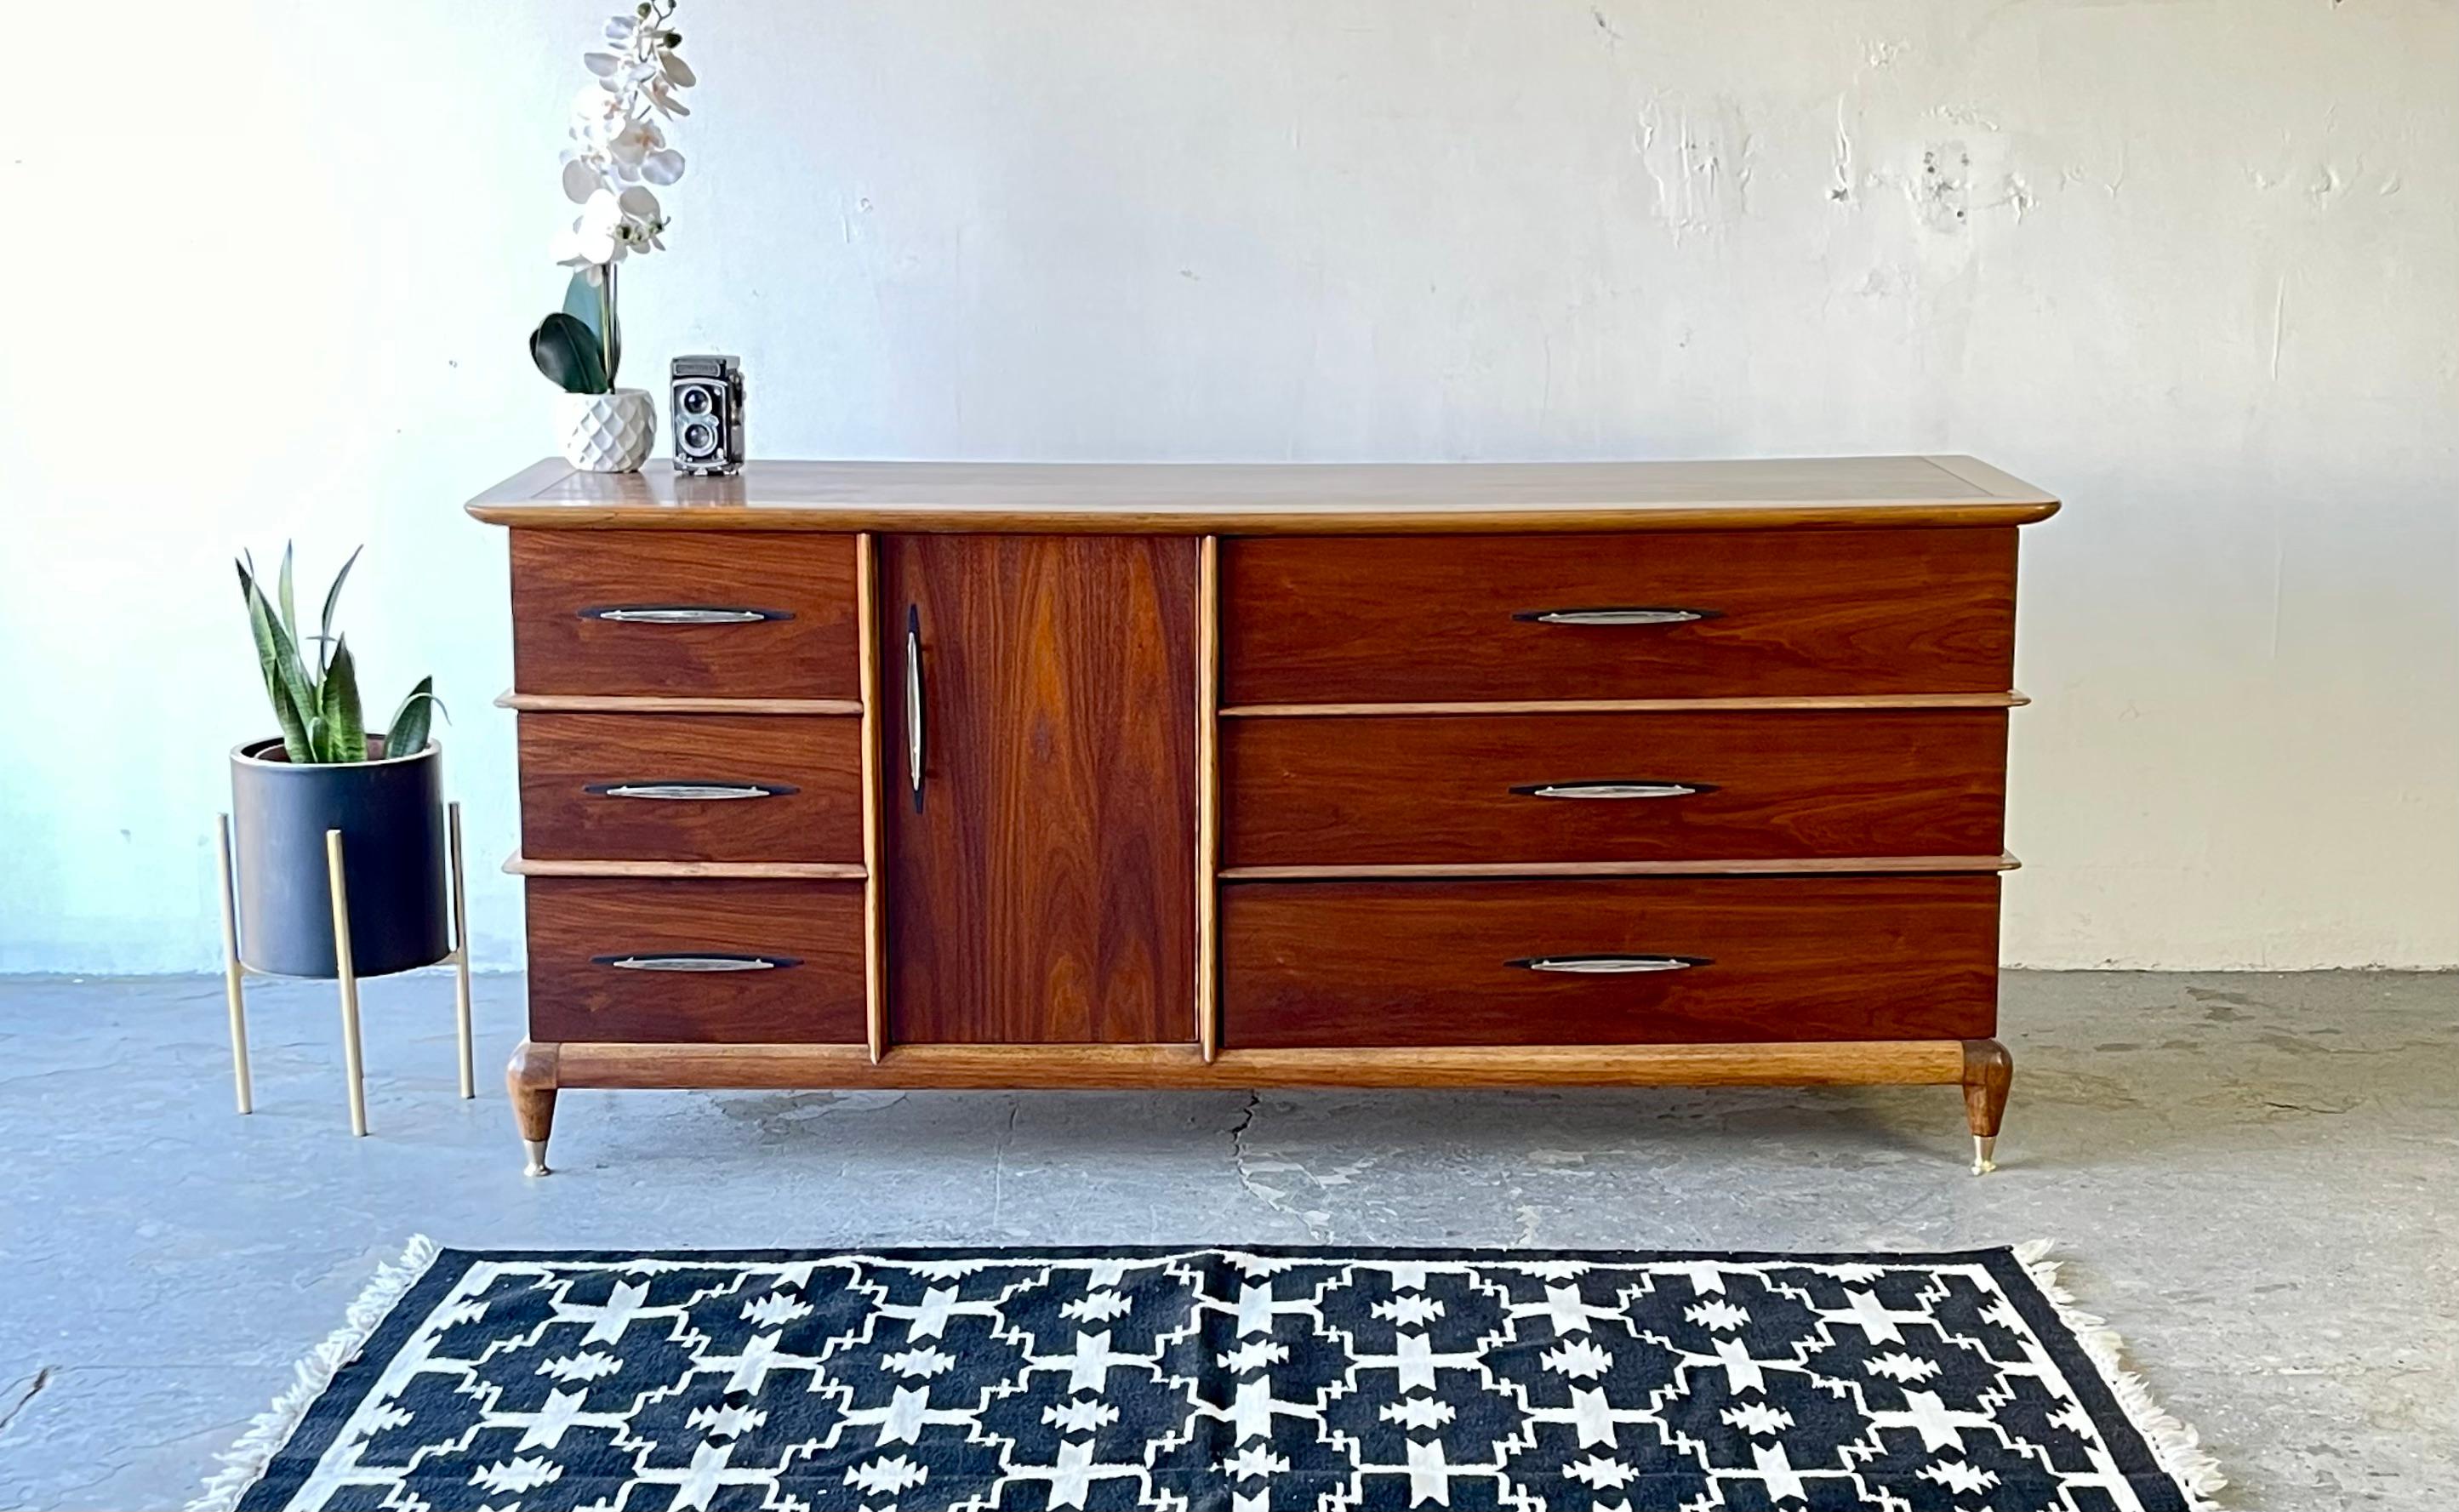 This unique vintage walnut dresser by Kent Coffey is from his 